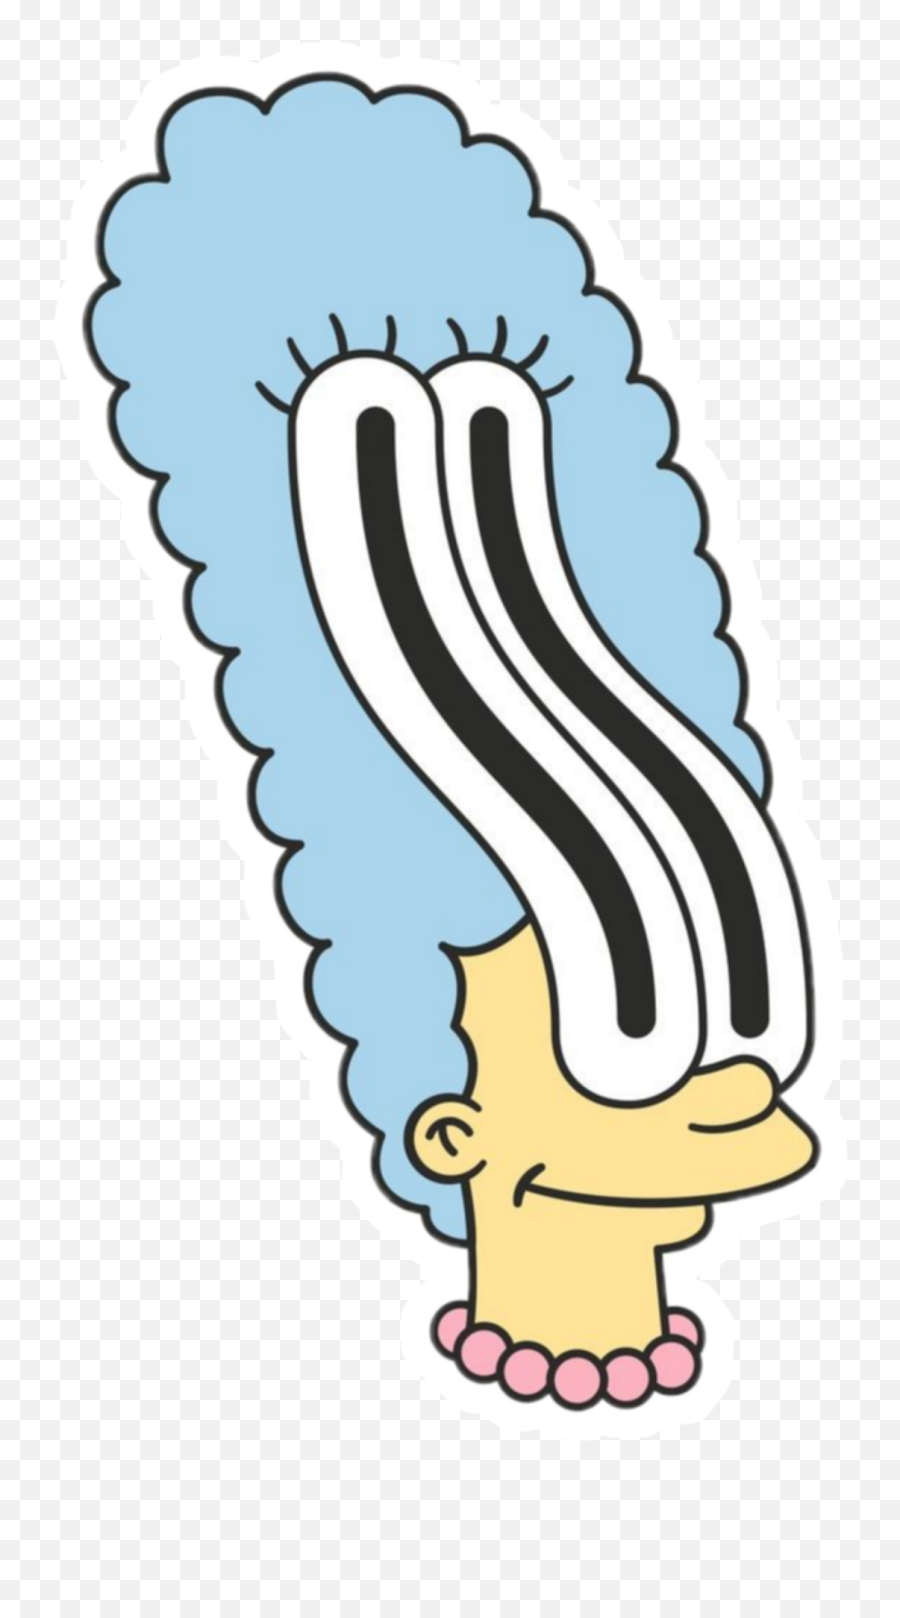 Marge Simpsons Sticker - Marge Simpson Aesthetic Sticker Emoji,Toad Marge Simpson Emoticon